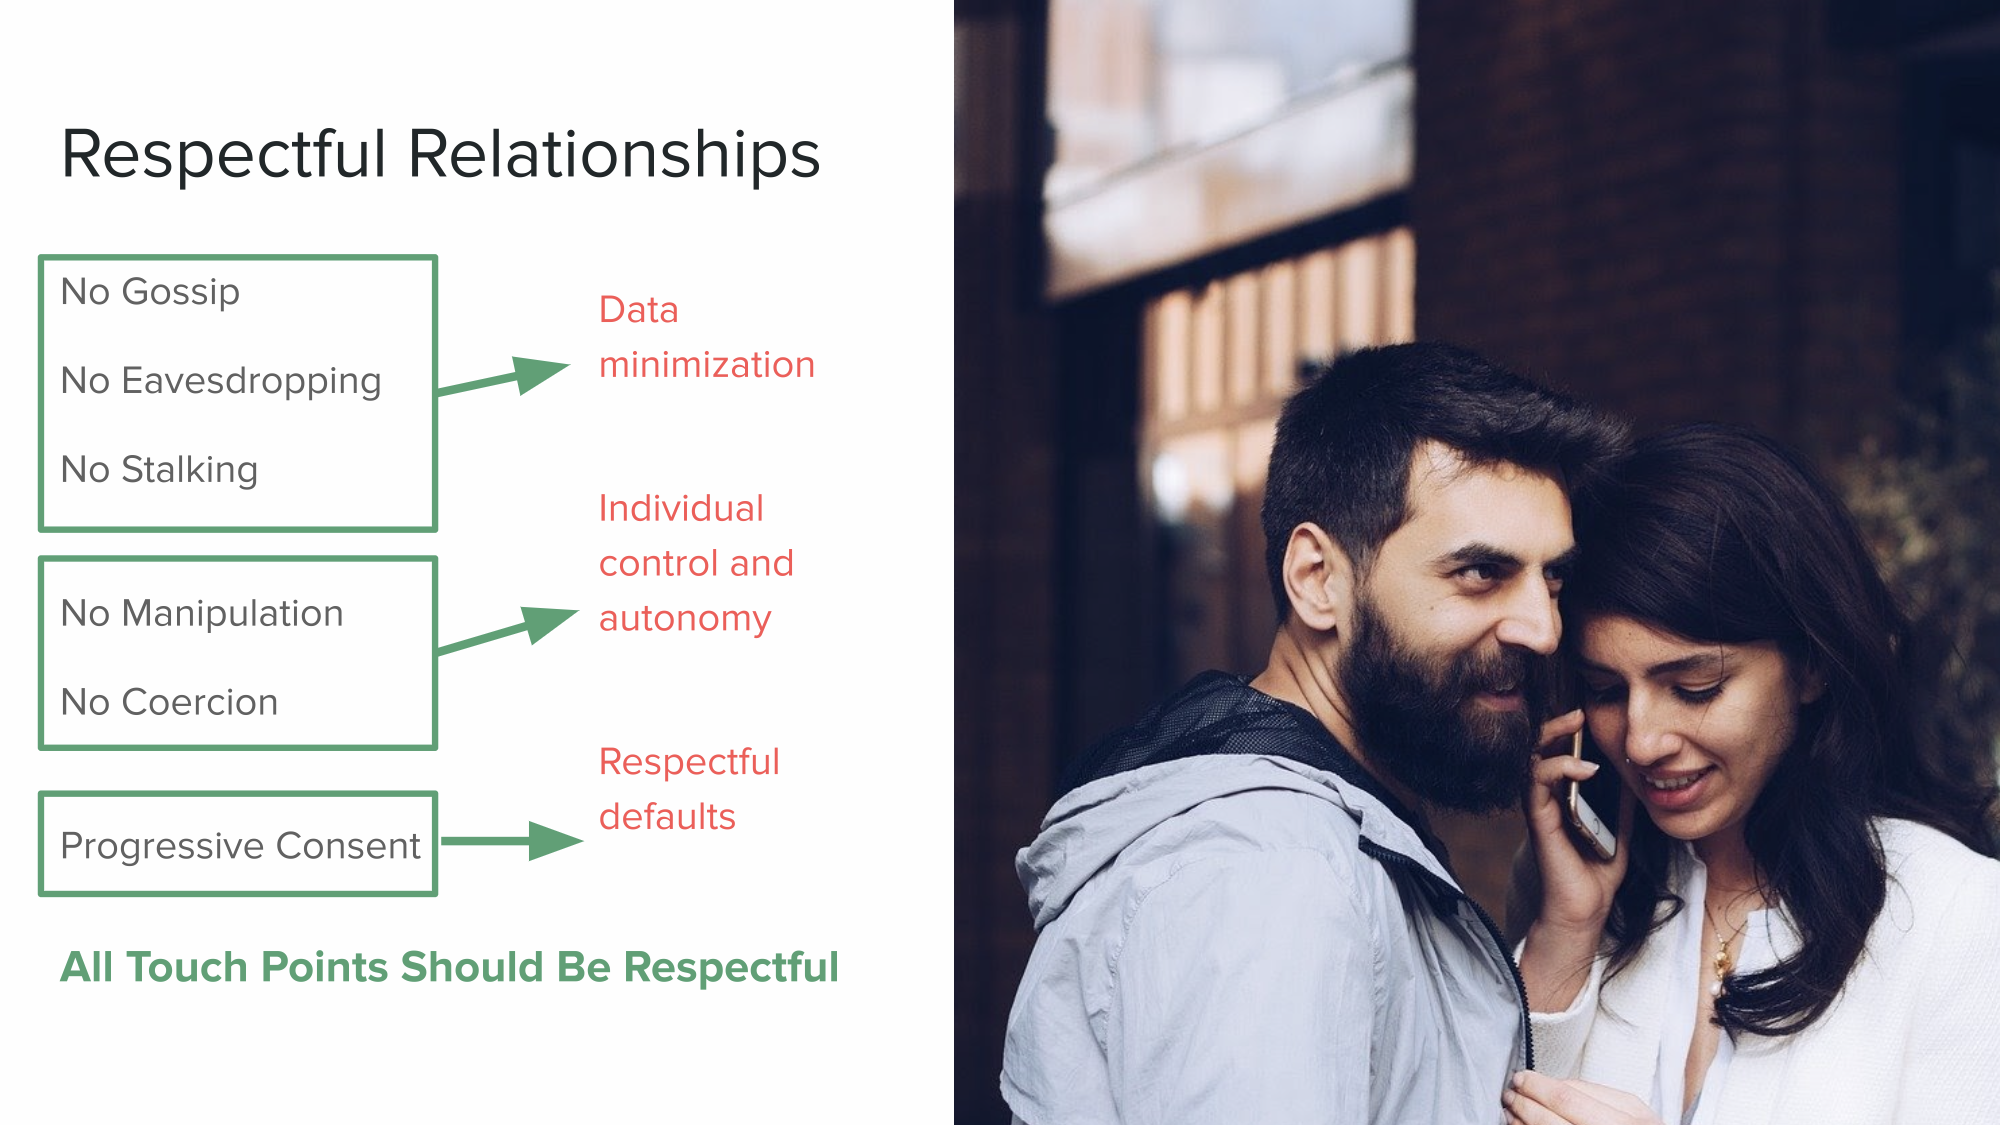 Respectful relationships. Data minimization includes: No gossip, no eavesdropping, no stalking. Individual control and autonomy includes: No manipulation, no coercion. Respectful defaults includes Progressive Consent.